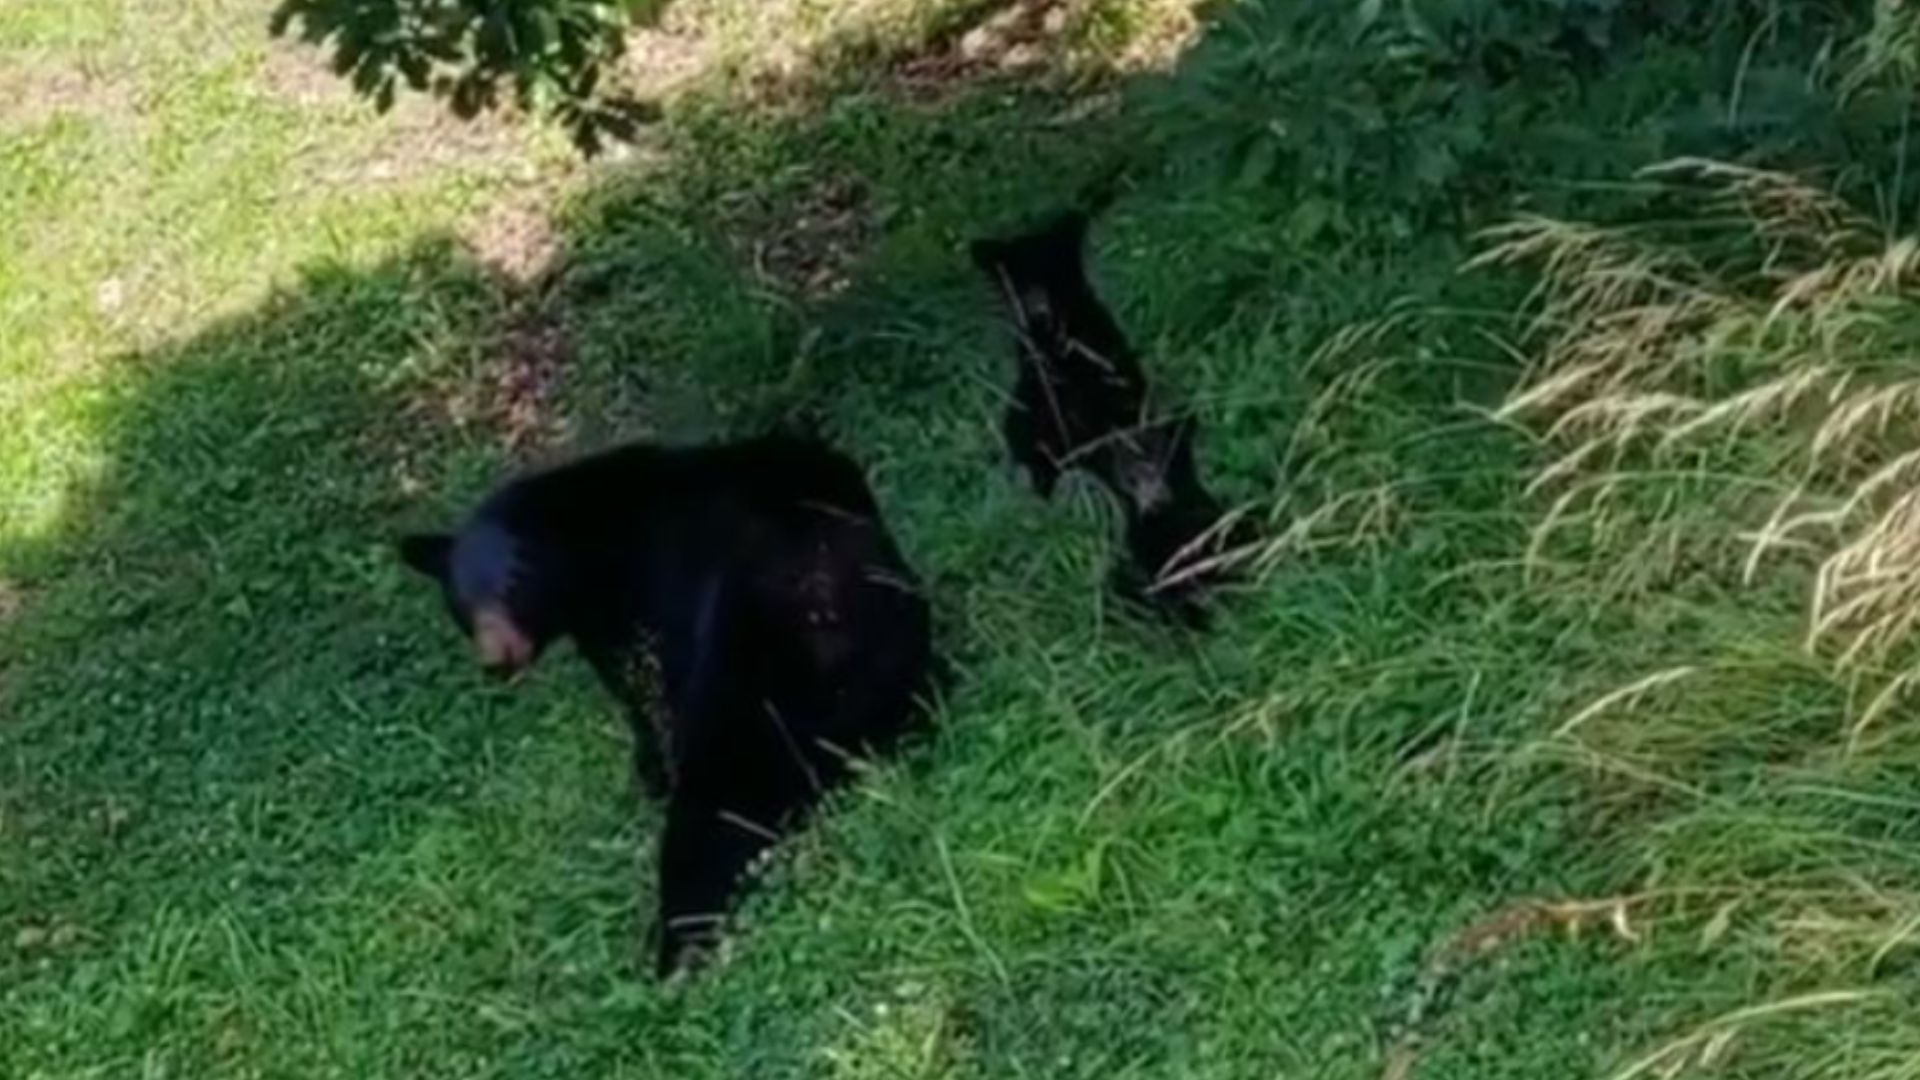 They're back! The photogenic bear family continues to thrive in Wears Valley. (Video: Sharon and Trevor Turner)